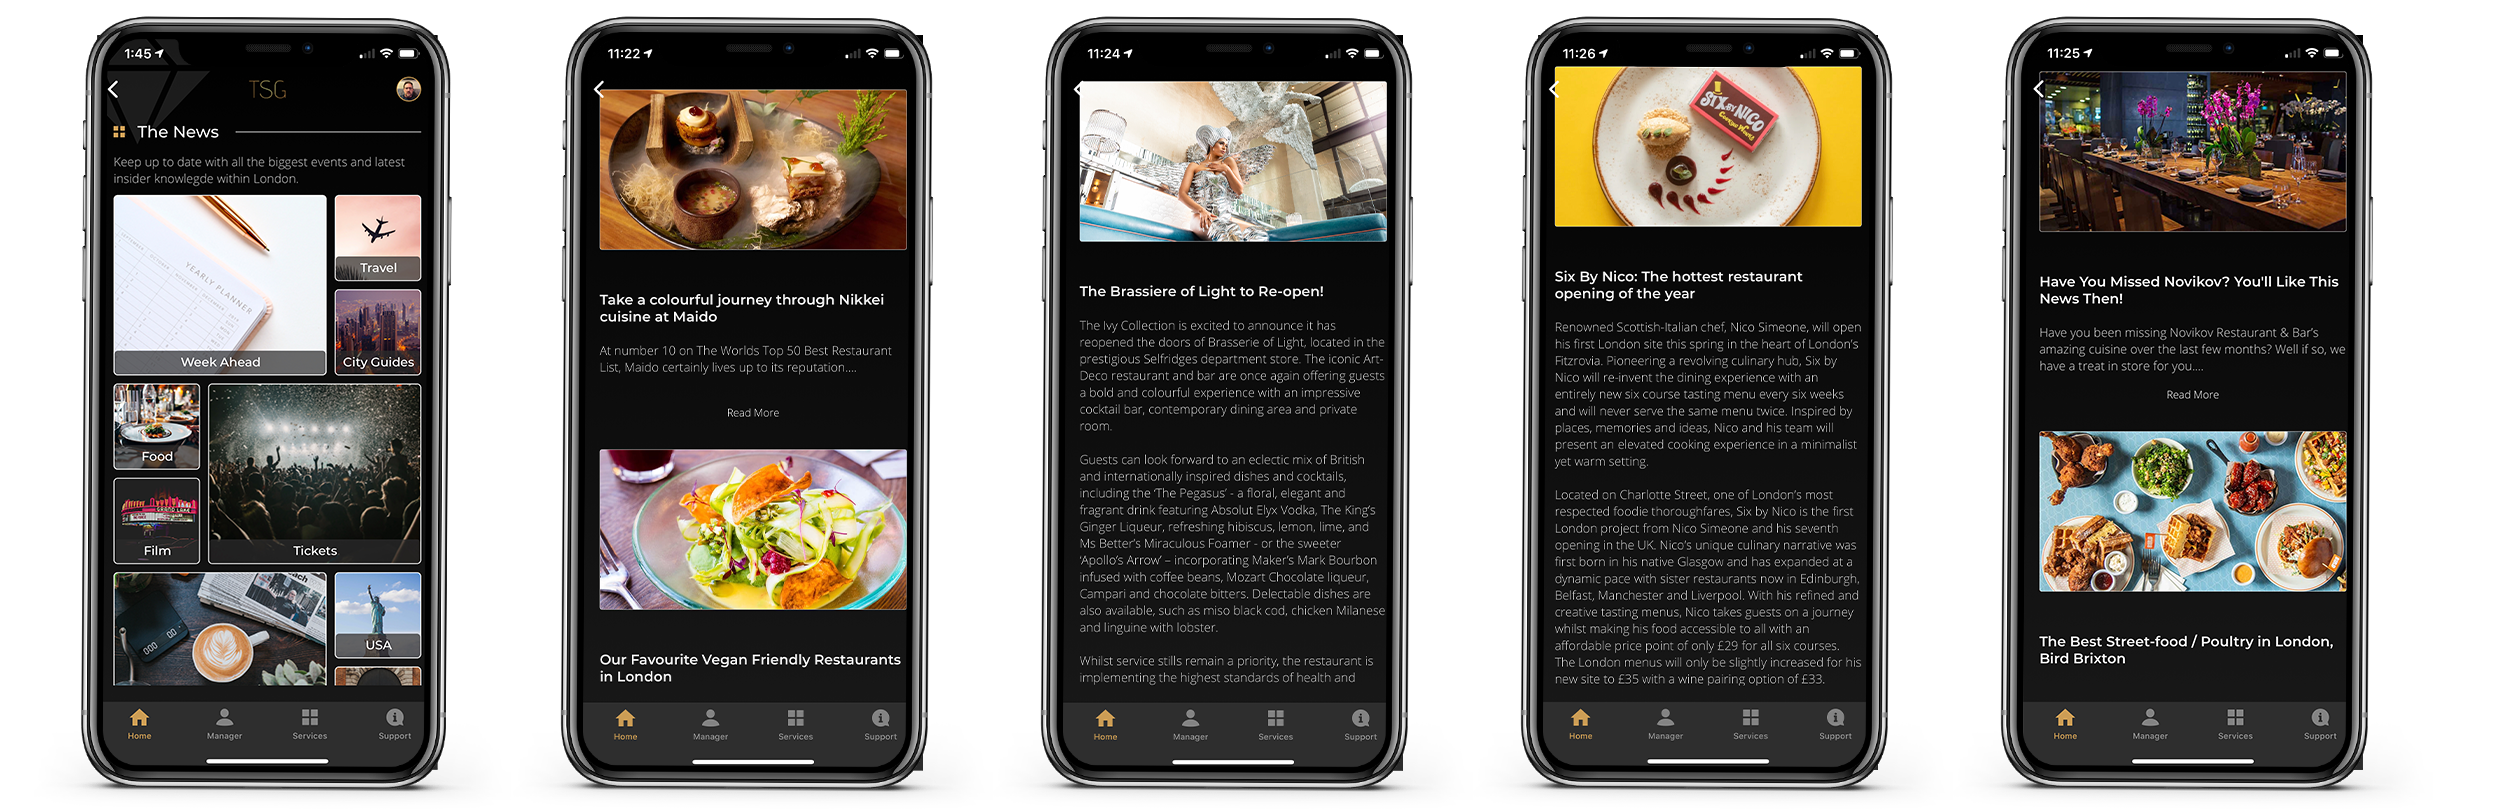 food and beverage view the latest london restaurant news and events through the sincura app